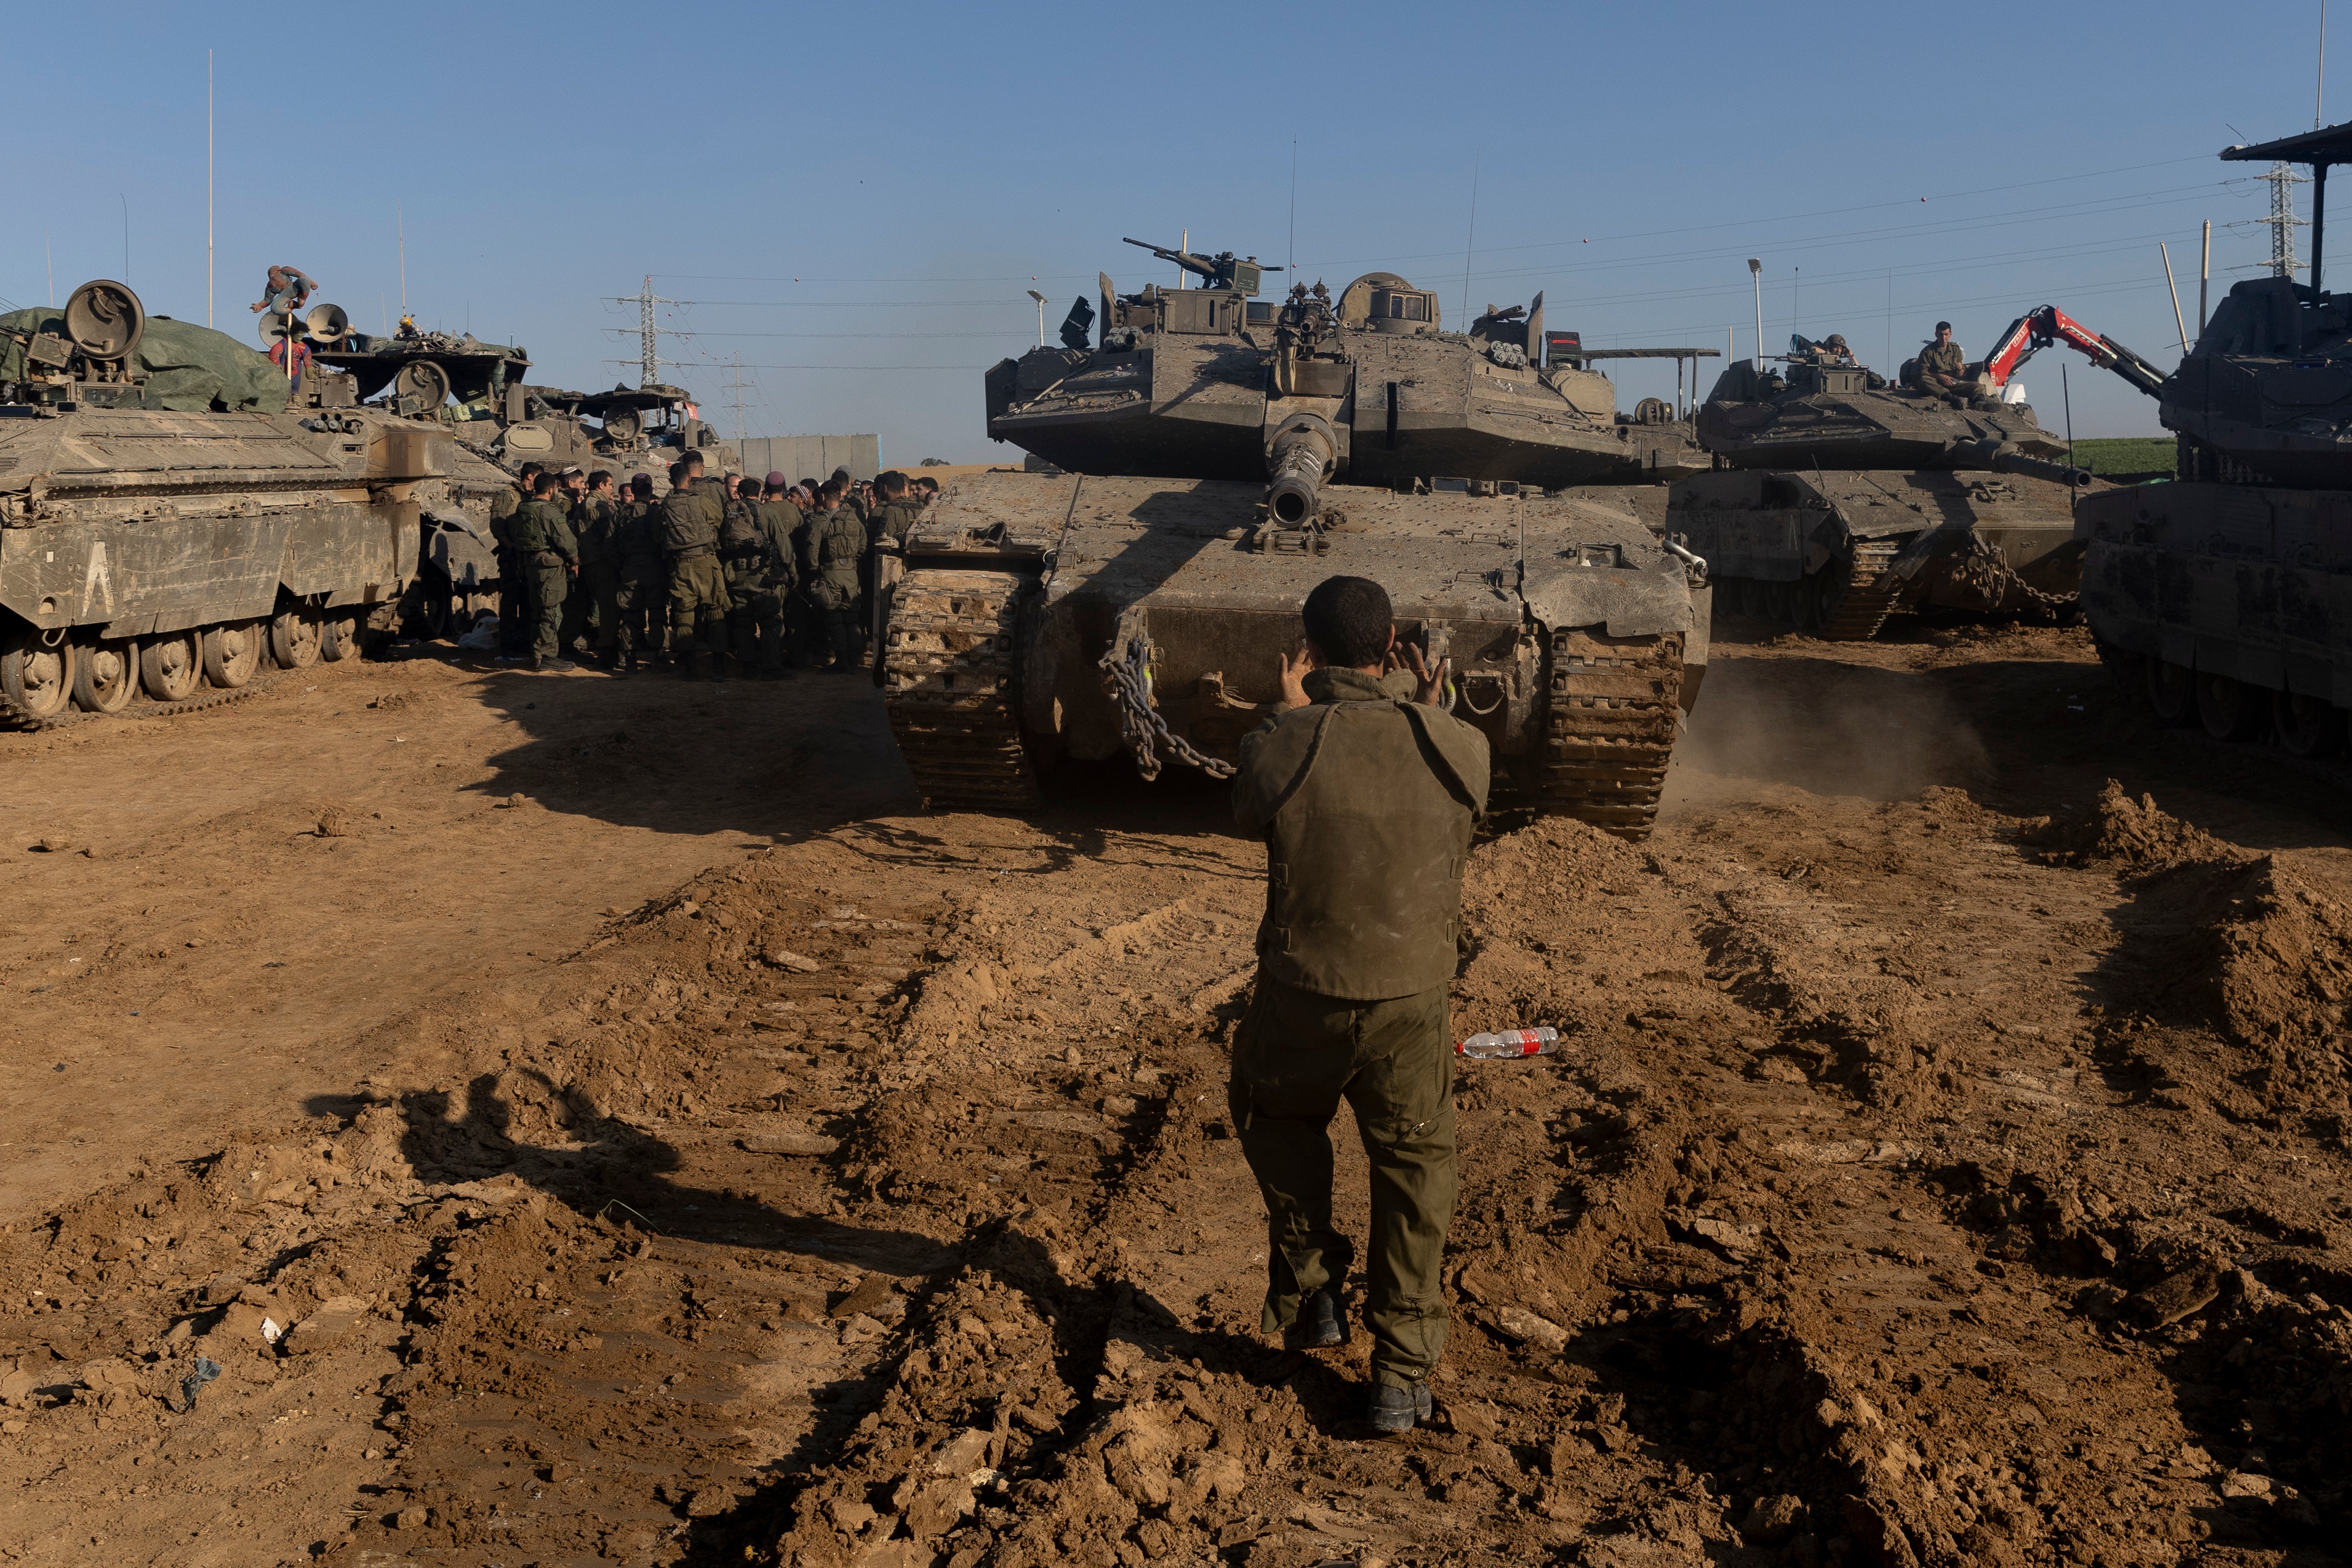 An Israeli soldier directs a tank near the border with the Gaza Strip